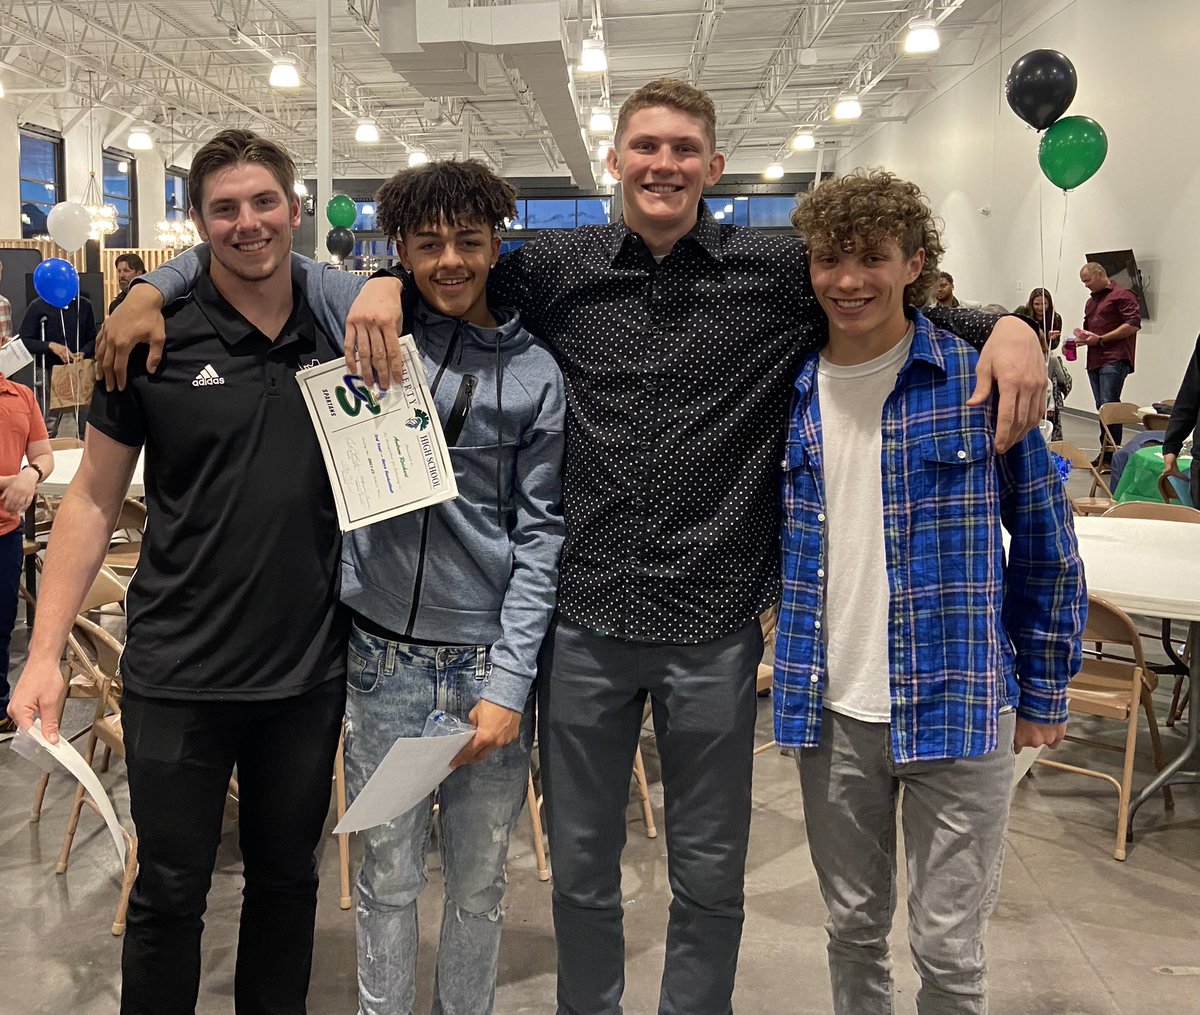 Our 2022 Doherty Boys Basketball Scholarship Recipients! Each athlete had to meet GPA, Attendance, Community Service, and Fundraising criteria in order to receive a part of the $50,000 scholarship. Thank you to Andy Wilfong for providing our players with this annual opportunity!